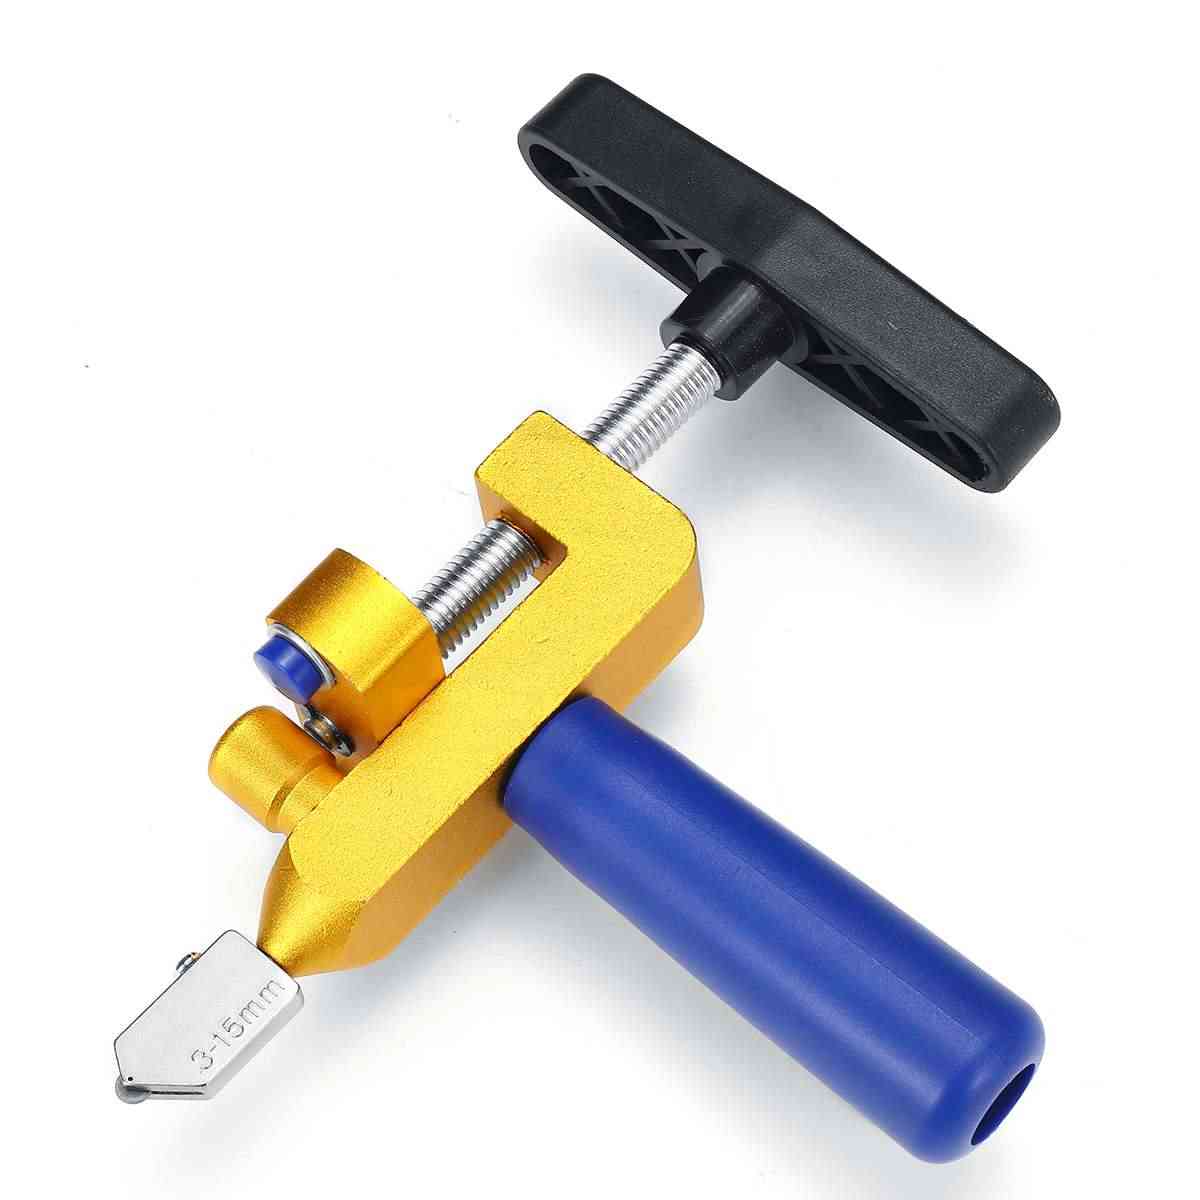 Glass Tile Cutter, 2 In 1 Ceramic Cutting Portable Tools